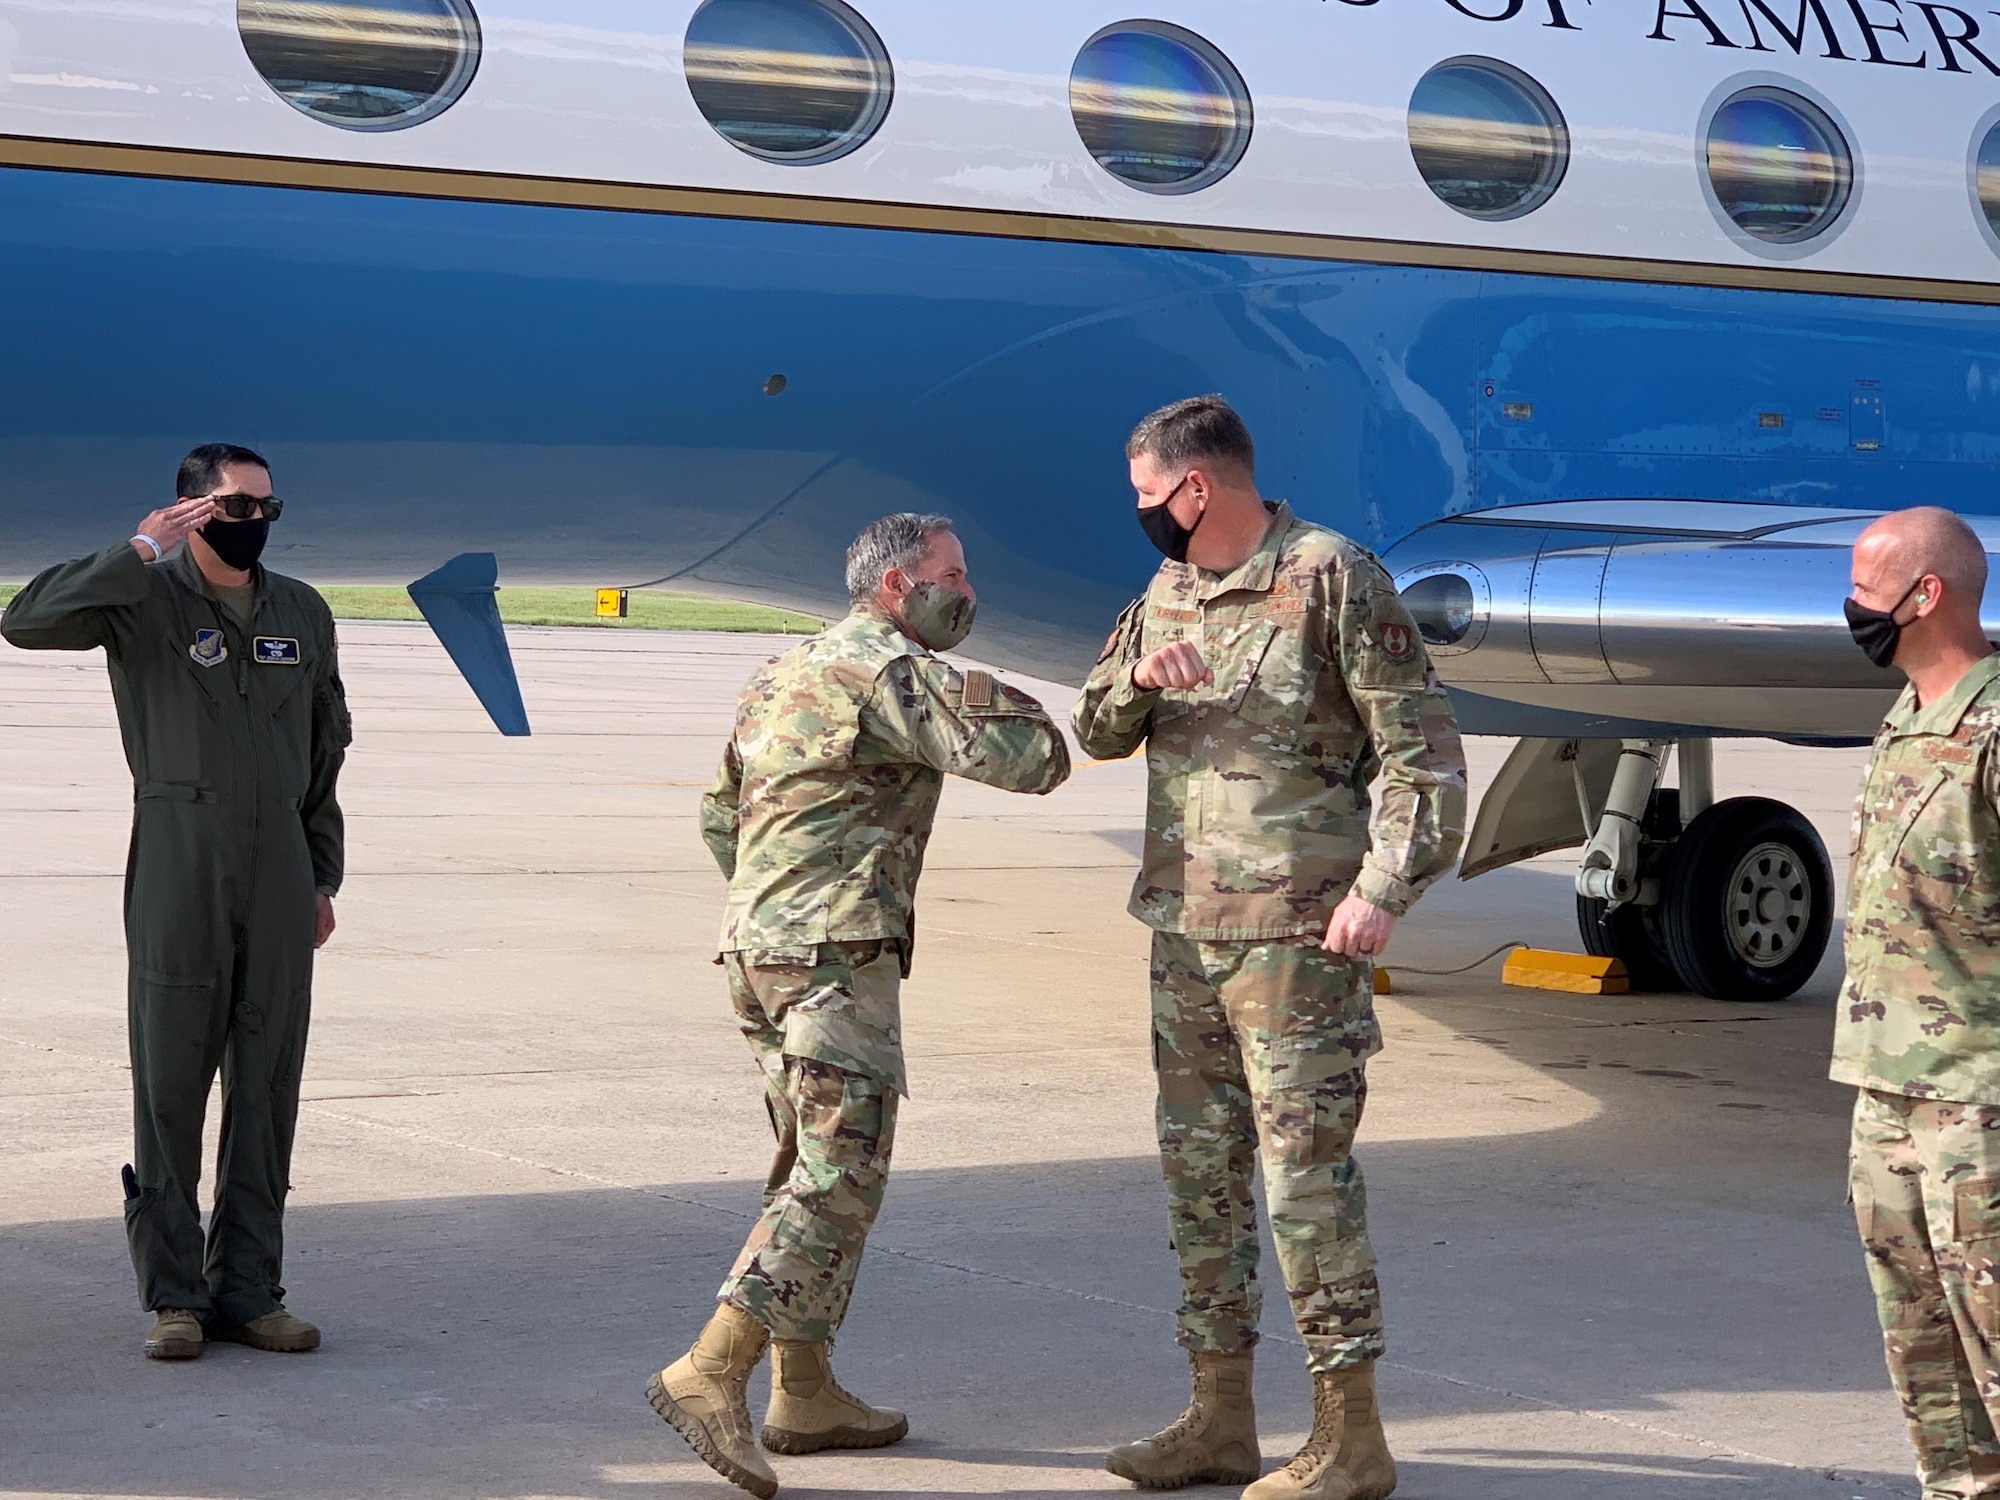 Lt. Gen. Gene Kirkland, Air Force Sustainment Center commander, right, greets Chief of Staff of the Air Force Gen. David L. Goldfein with an elbow bump upon his arrival at Tinker Air Force Base June 8.  Goldfein visited Tinker to observe firsthand the operational and financial impacts to sustainment due to COVID-19. (U.S. Air Force photo by Jonathan Stock)